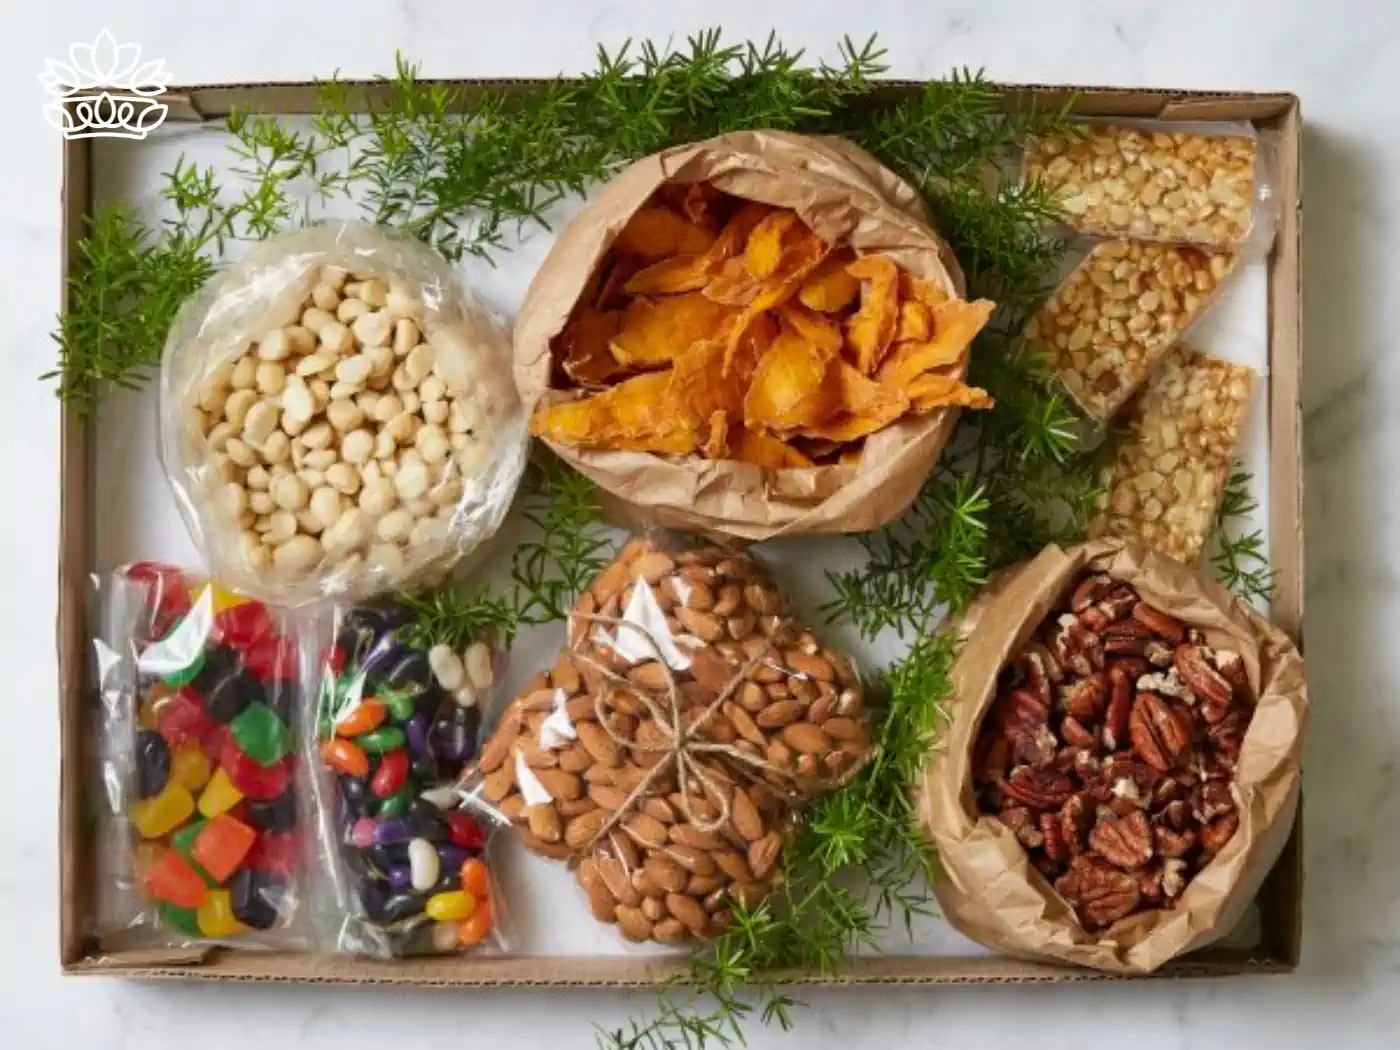 An assortment of gourmet snacks in a gift box, featuring macadamia nuts, dried mango, assorted seed bars, almonds, pecans, and colorful candies, garnished with fresh green herbs. Fabulous Flowers and Gifts.